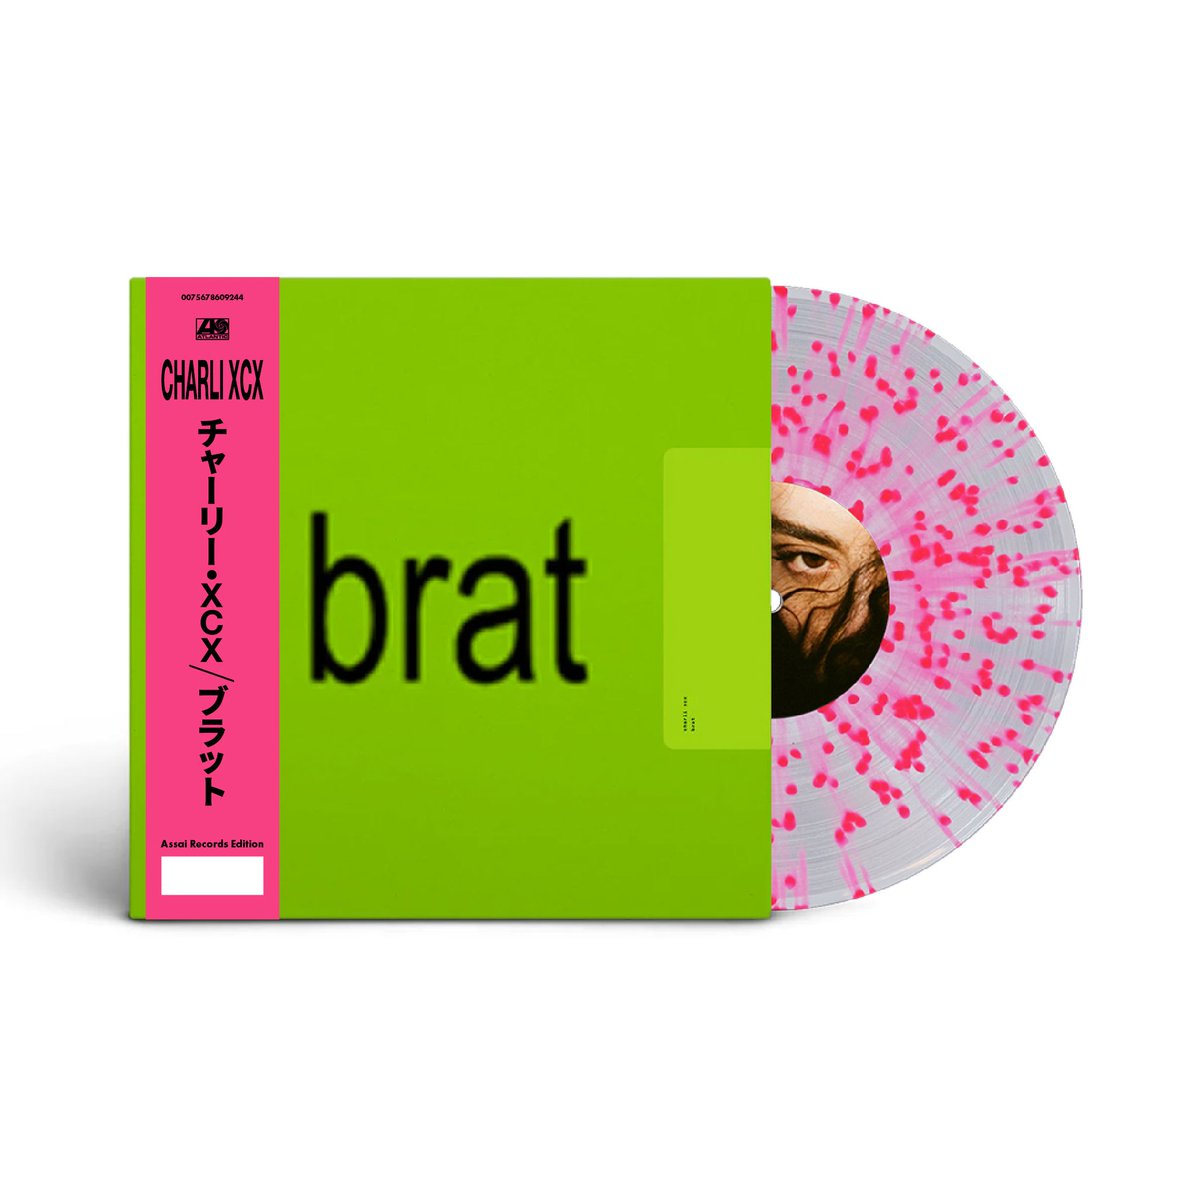 this is the best version of brat on vinyl btw, the vinyl itself looks like candy, the pink obi strip is too cute, pink goes well with green, if you ordered this version you definitely made the right choice